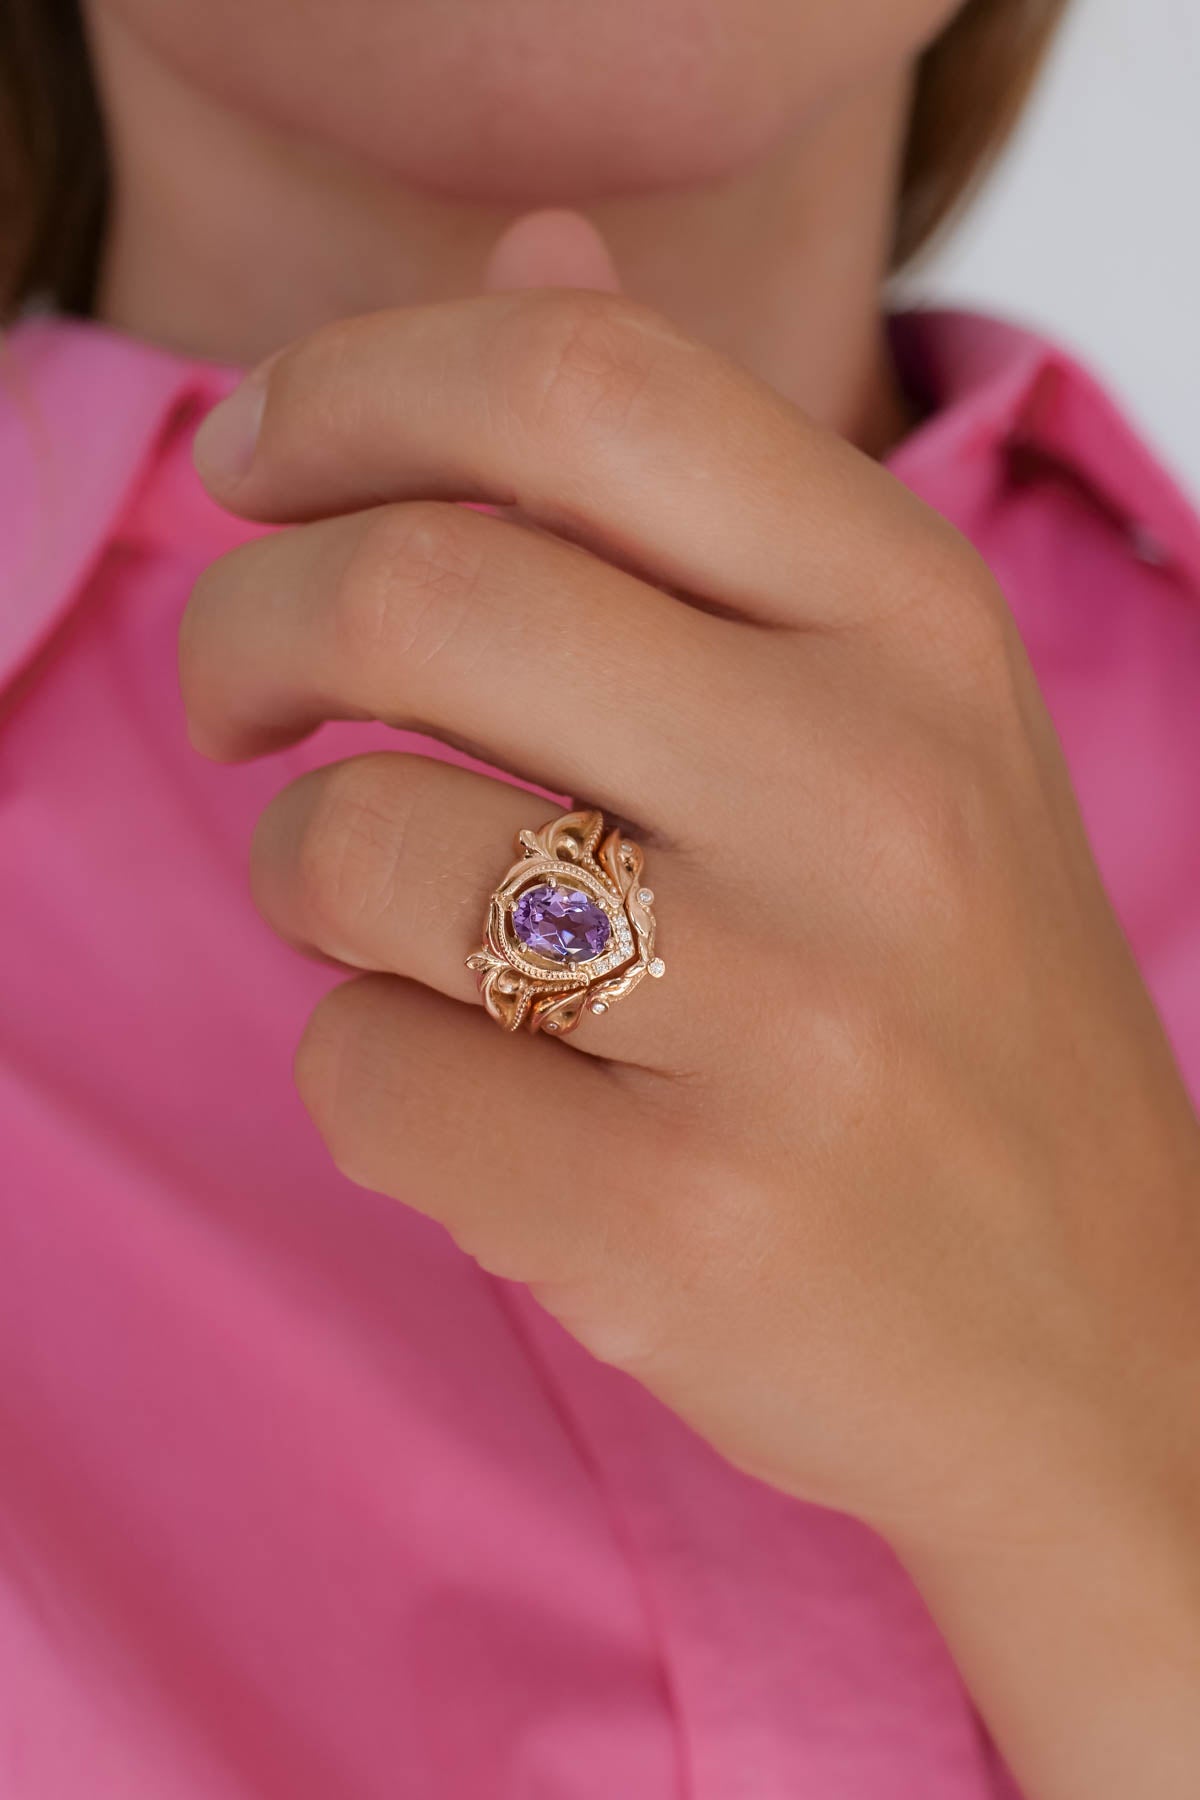 READY TO SHIP: Lida ring set in 14K rose gold, amethyst 8x6 mm, moissanites, RING SIZE 6 US - Eden Garden Jewelry™